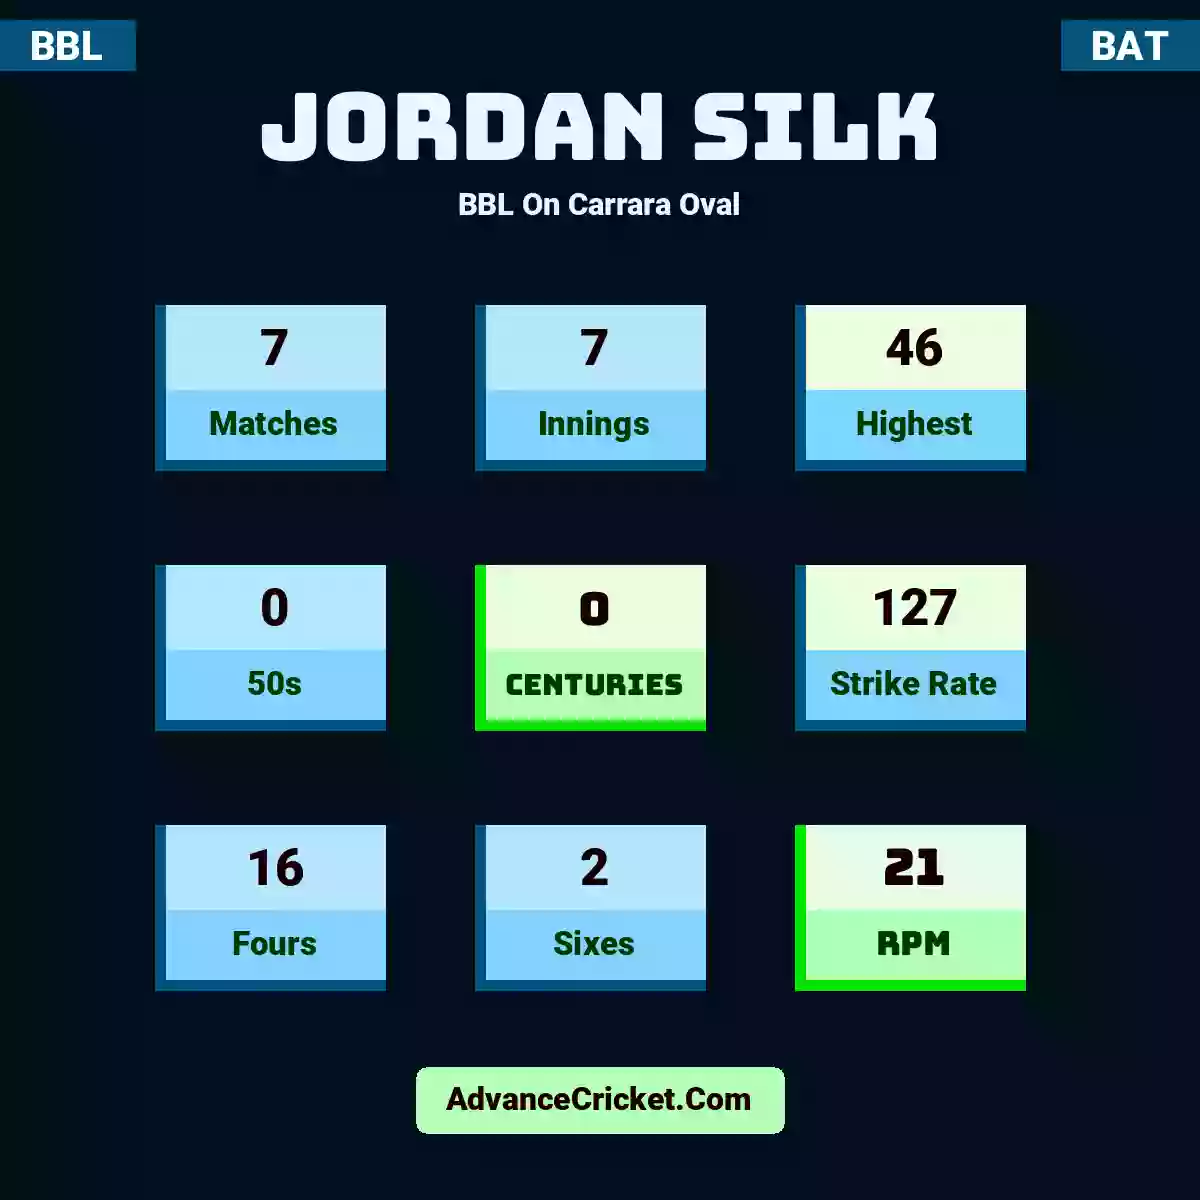 Jordan Silk BBL  On Carrara Oval, Jordan Silk played 7 matches, scored 46 runs as highest, 0 half-centuries, and 0 centuries, with a strike rate of 127. J.Silk hit 16 fours and 2 sixes, with an RPM of 21.